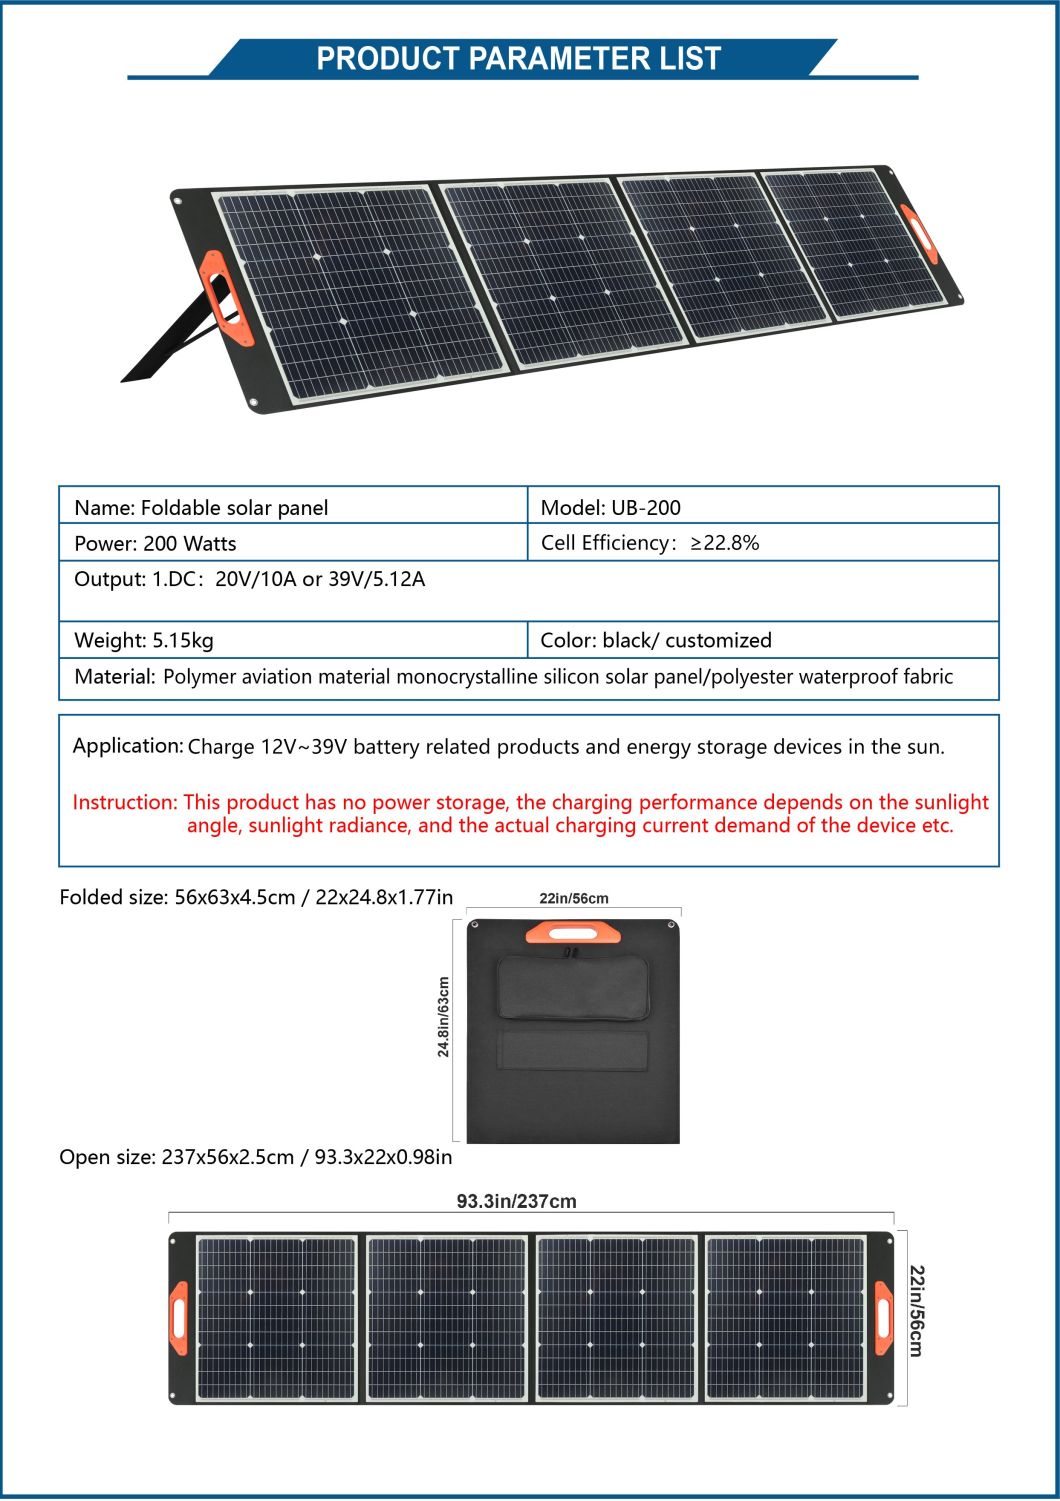 200W Foldable Portable Flexible Waterproof Mini High Efficiency Solar Panel Power for Cell Phone Laptop